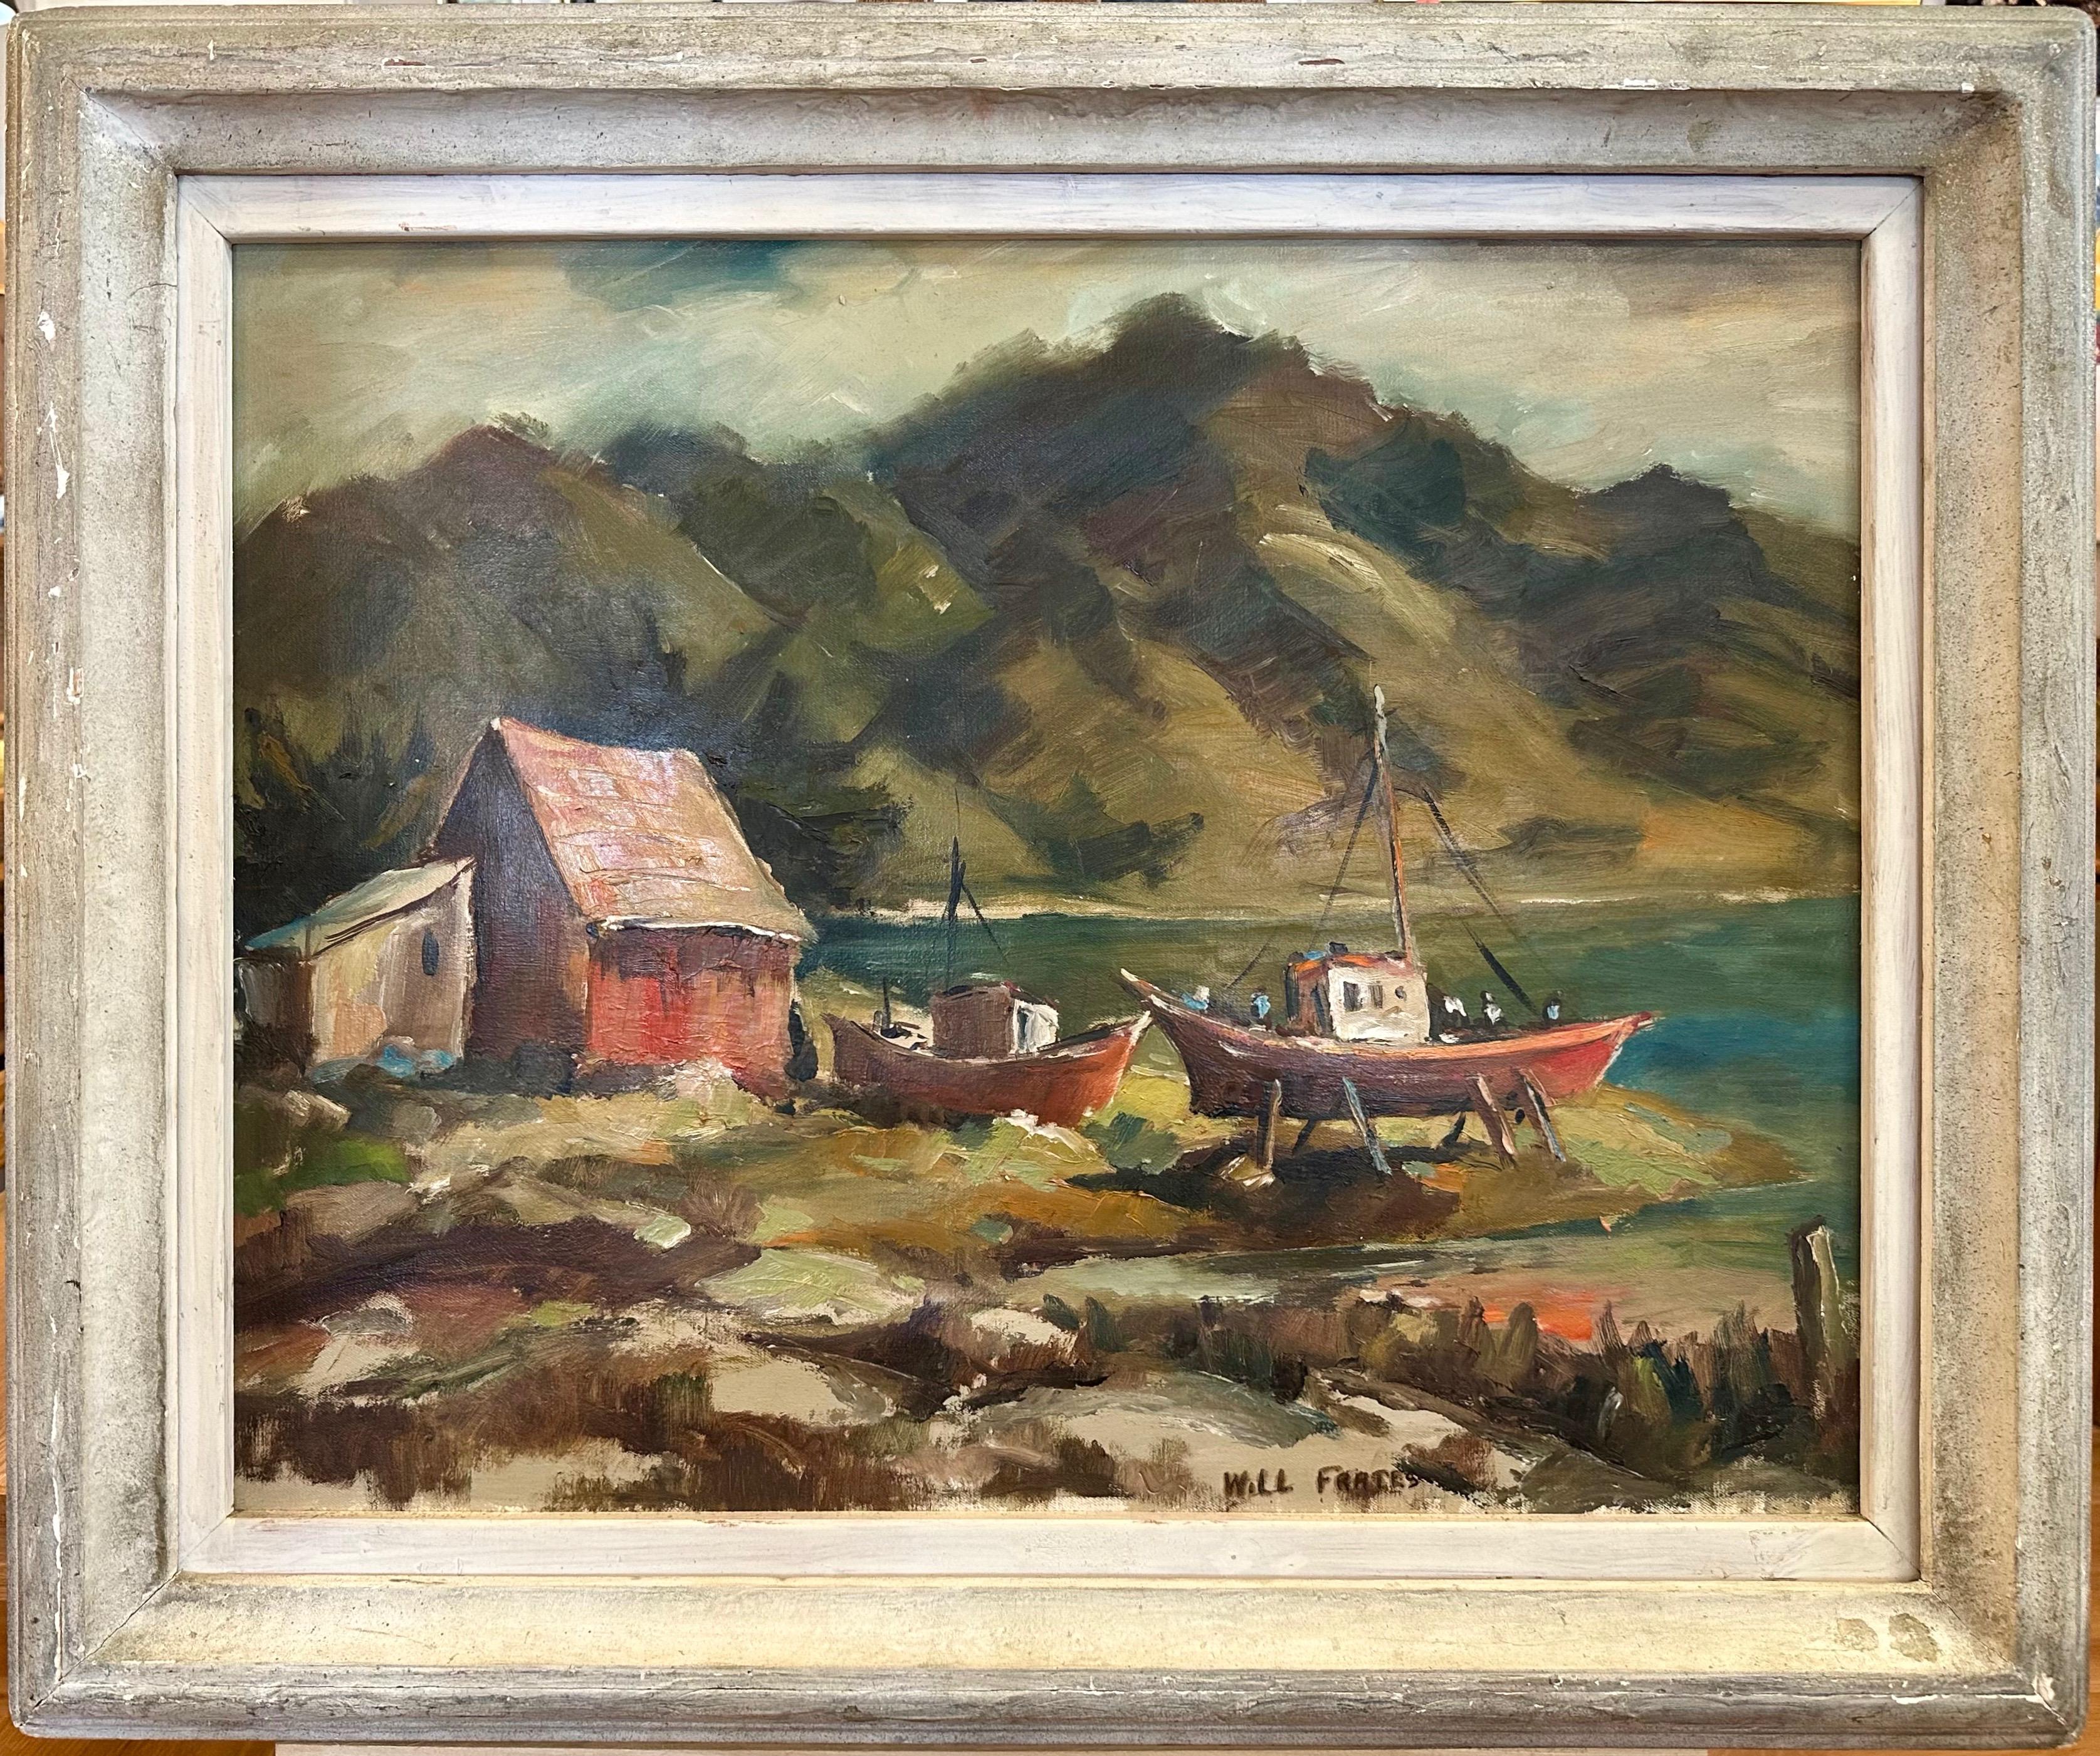 A large and evocative circa 1950 framed impressionist landscape oil painting on canvas titled “Princeton Beach [Boat Repair]” by noted northern California artist William “Will” E. Frates (b. 1896–1969). 

Captivating coastal setting depicts an